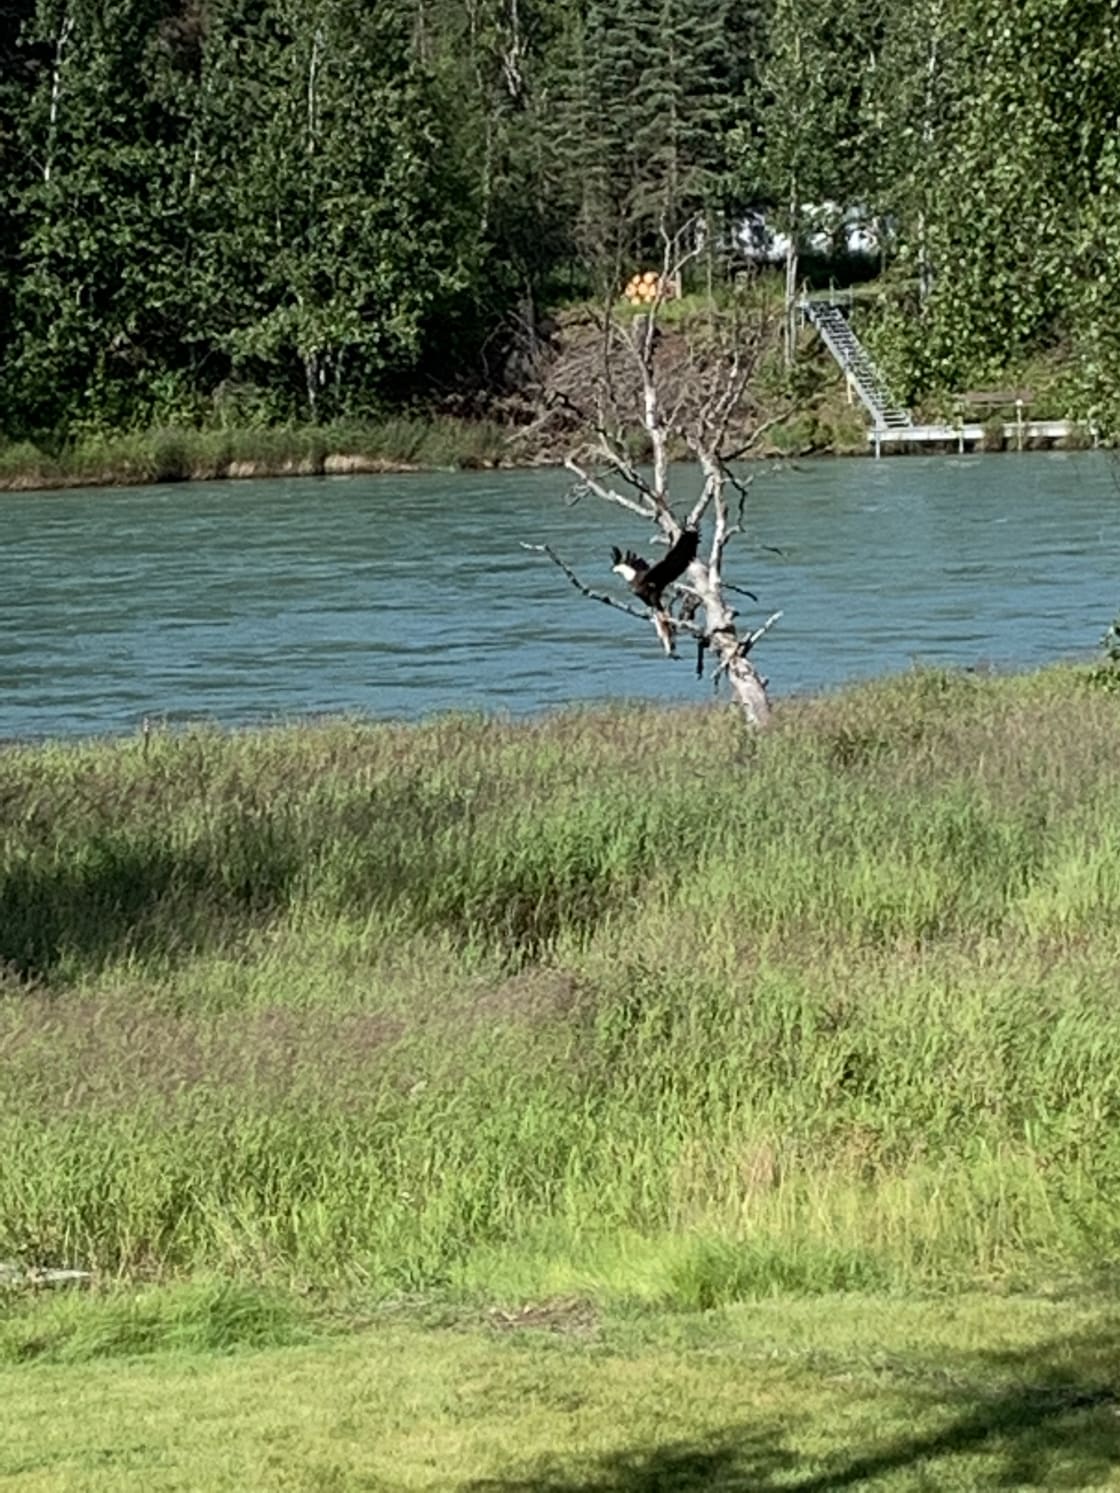 The fishing is so good, the eagles even hang out here.